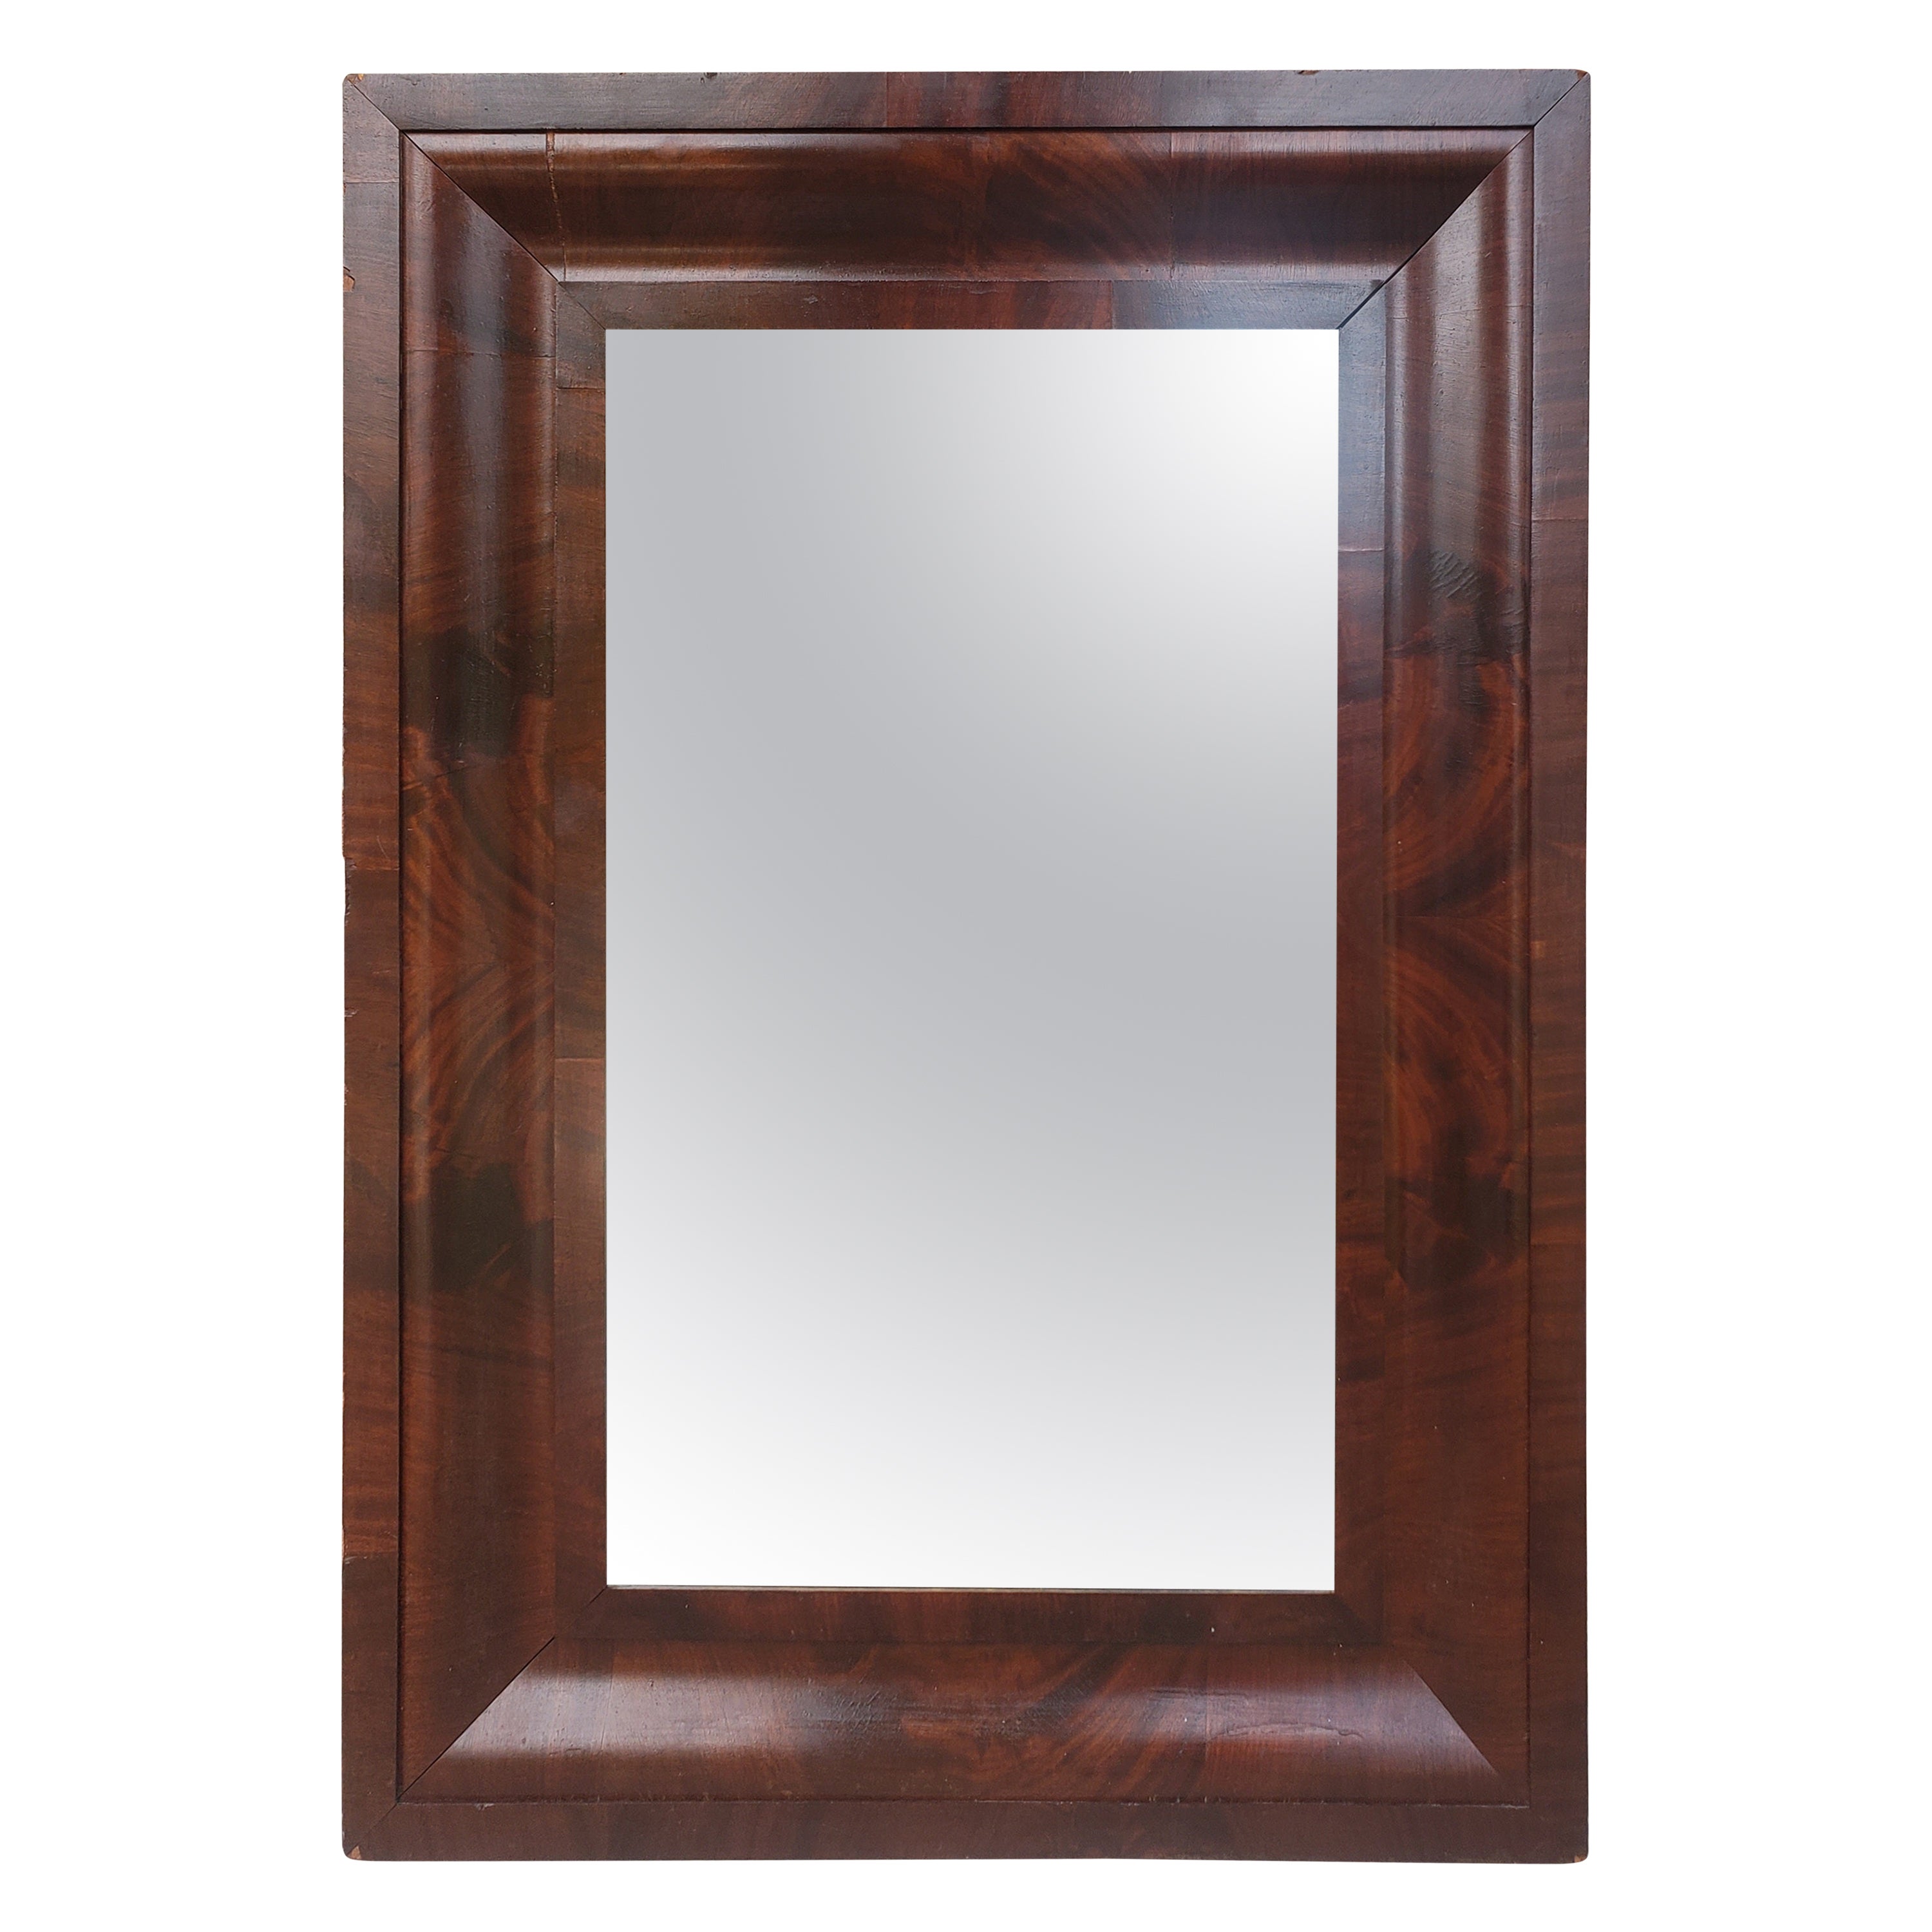 19th Century American Empire Flame Mahogany Wall Mirror For Sale